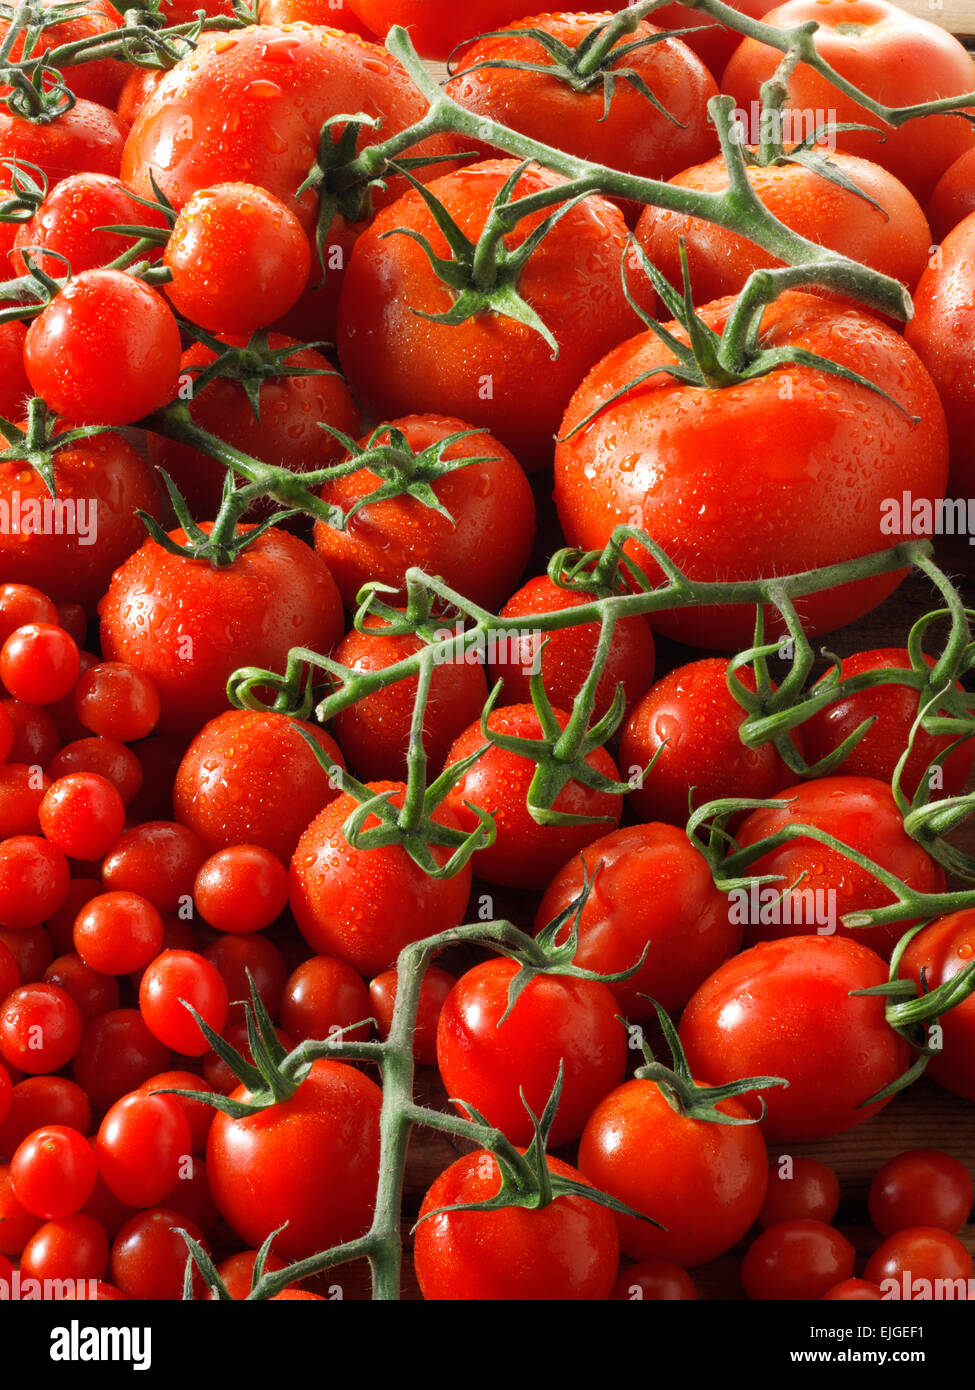 mixed fresh red whole tomatoes on the vine Stock Photo